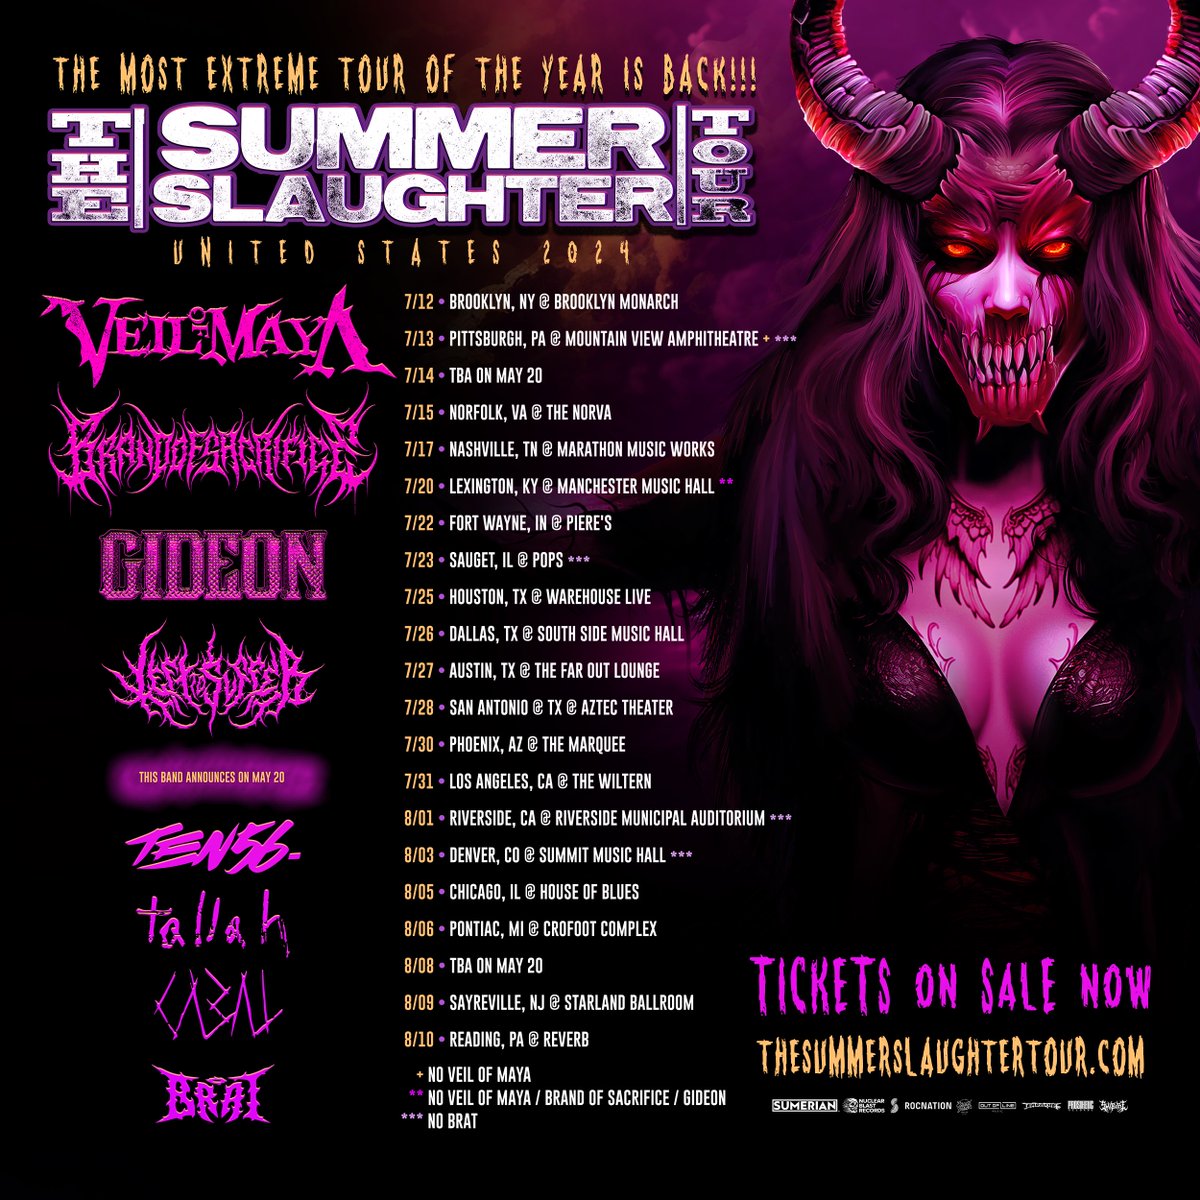 Tickets for @summerslaughter are on sale NOW 🖖